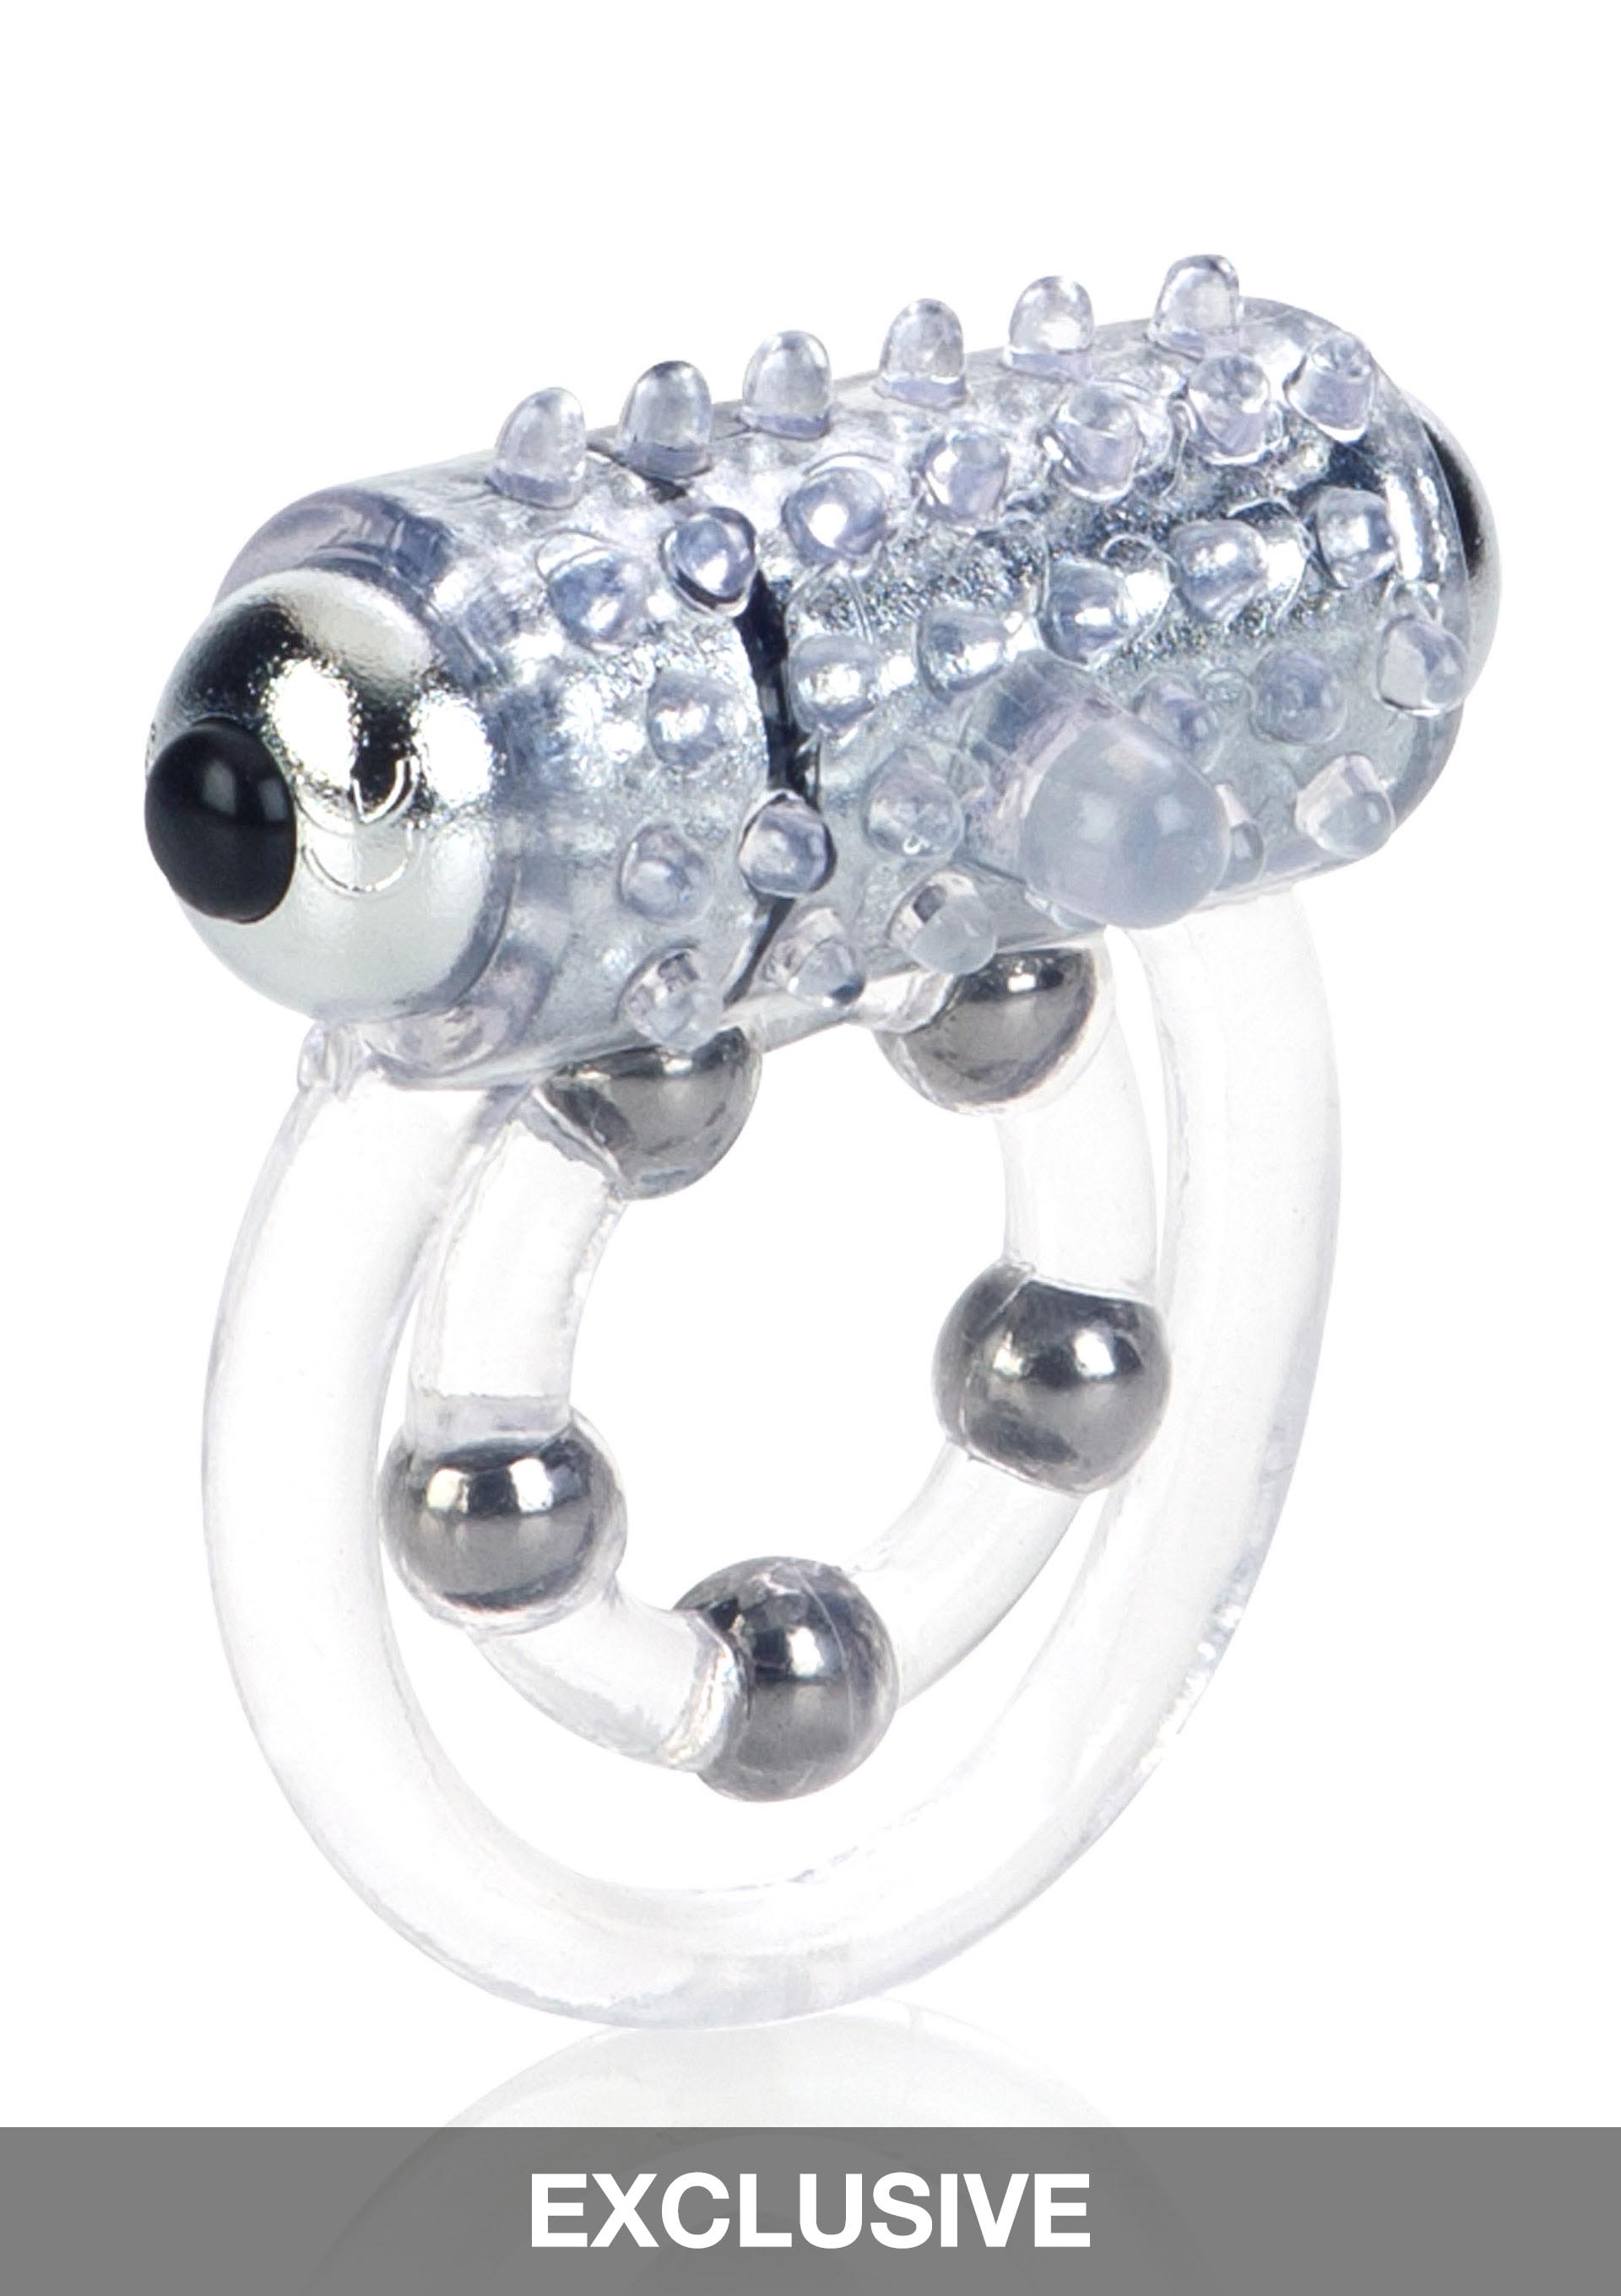 Anneaux cockring : maximus ring 5 stroke beads vibr.